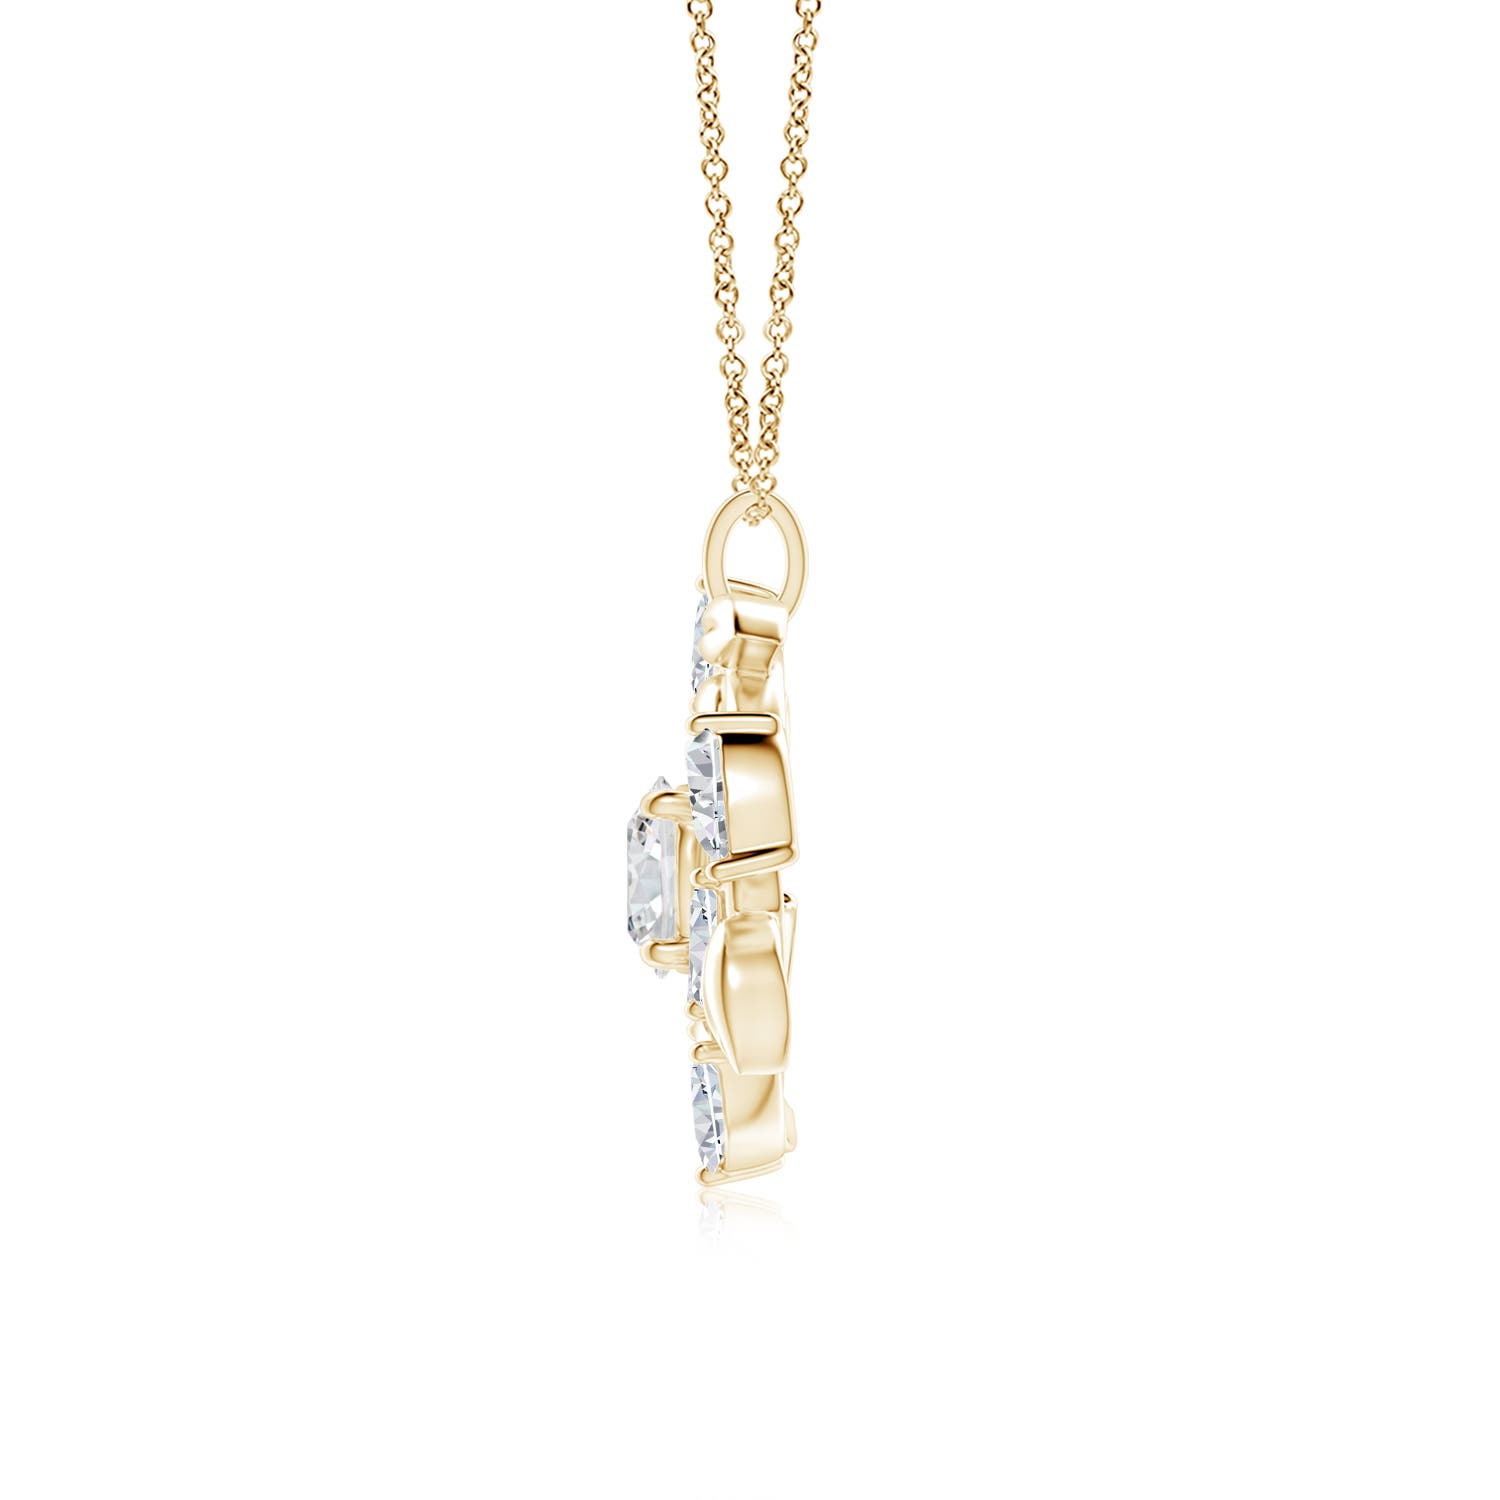 H, SI2 / 3.05 CT / 14 KT Yellow Gold